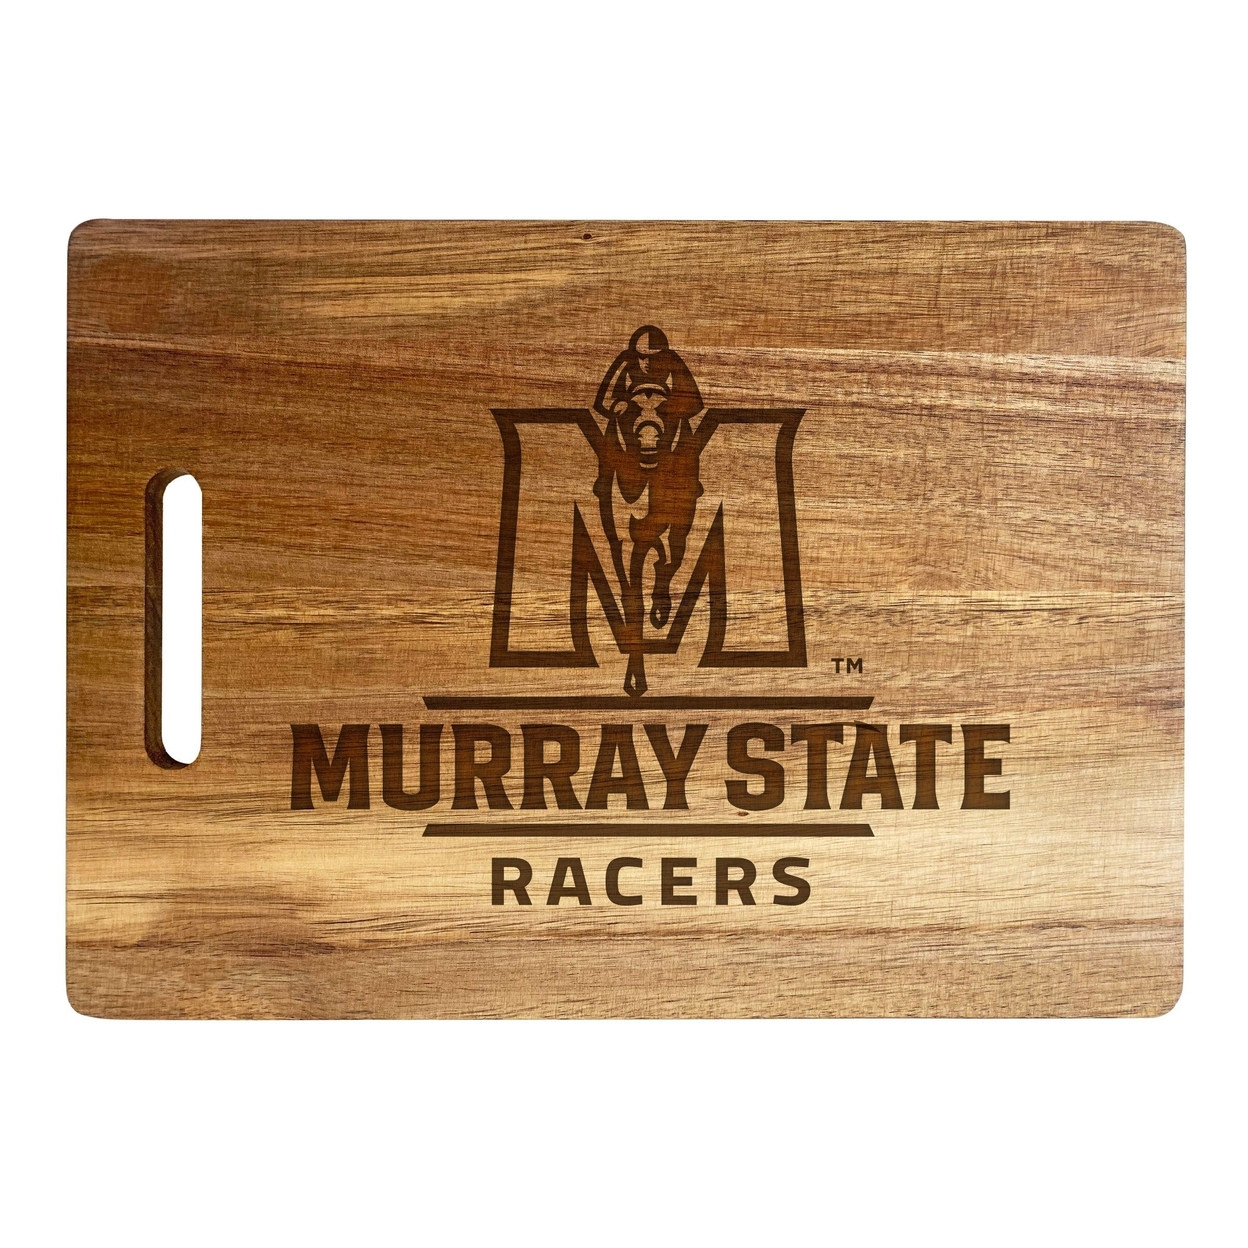 Murray State University Engraved Wooden Cutting Board 10 X 14 Acacia Wood - Large Engraving